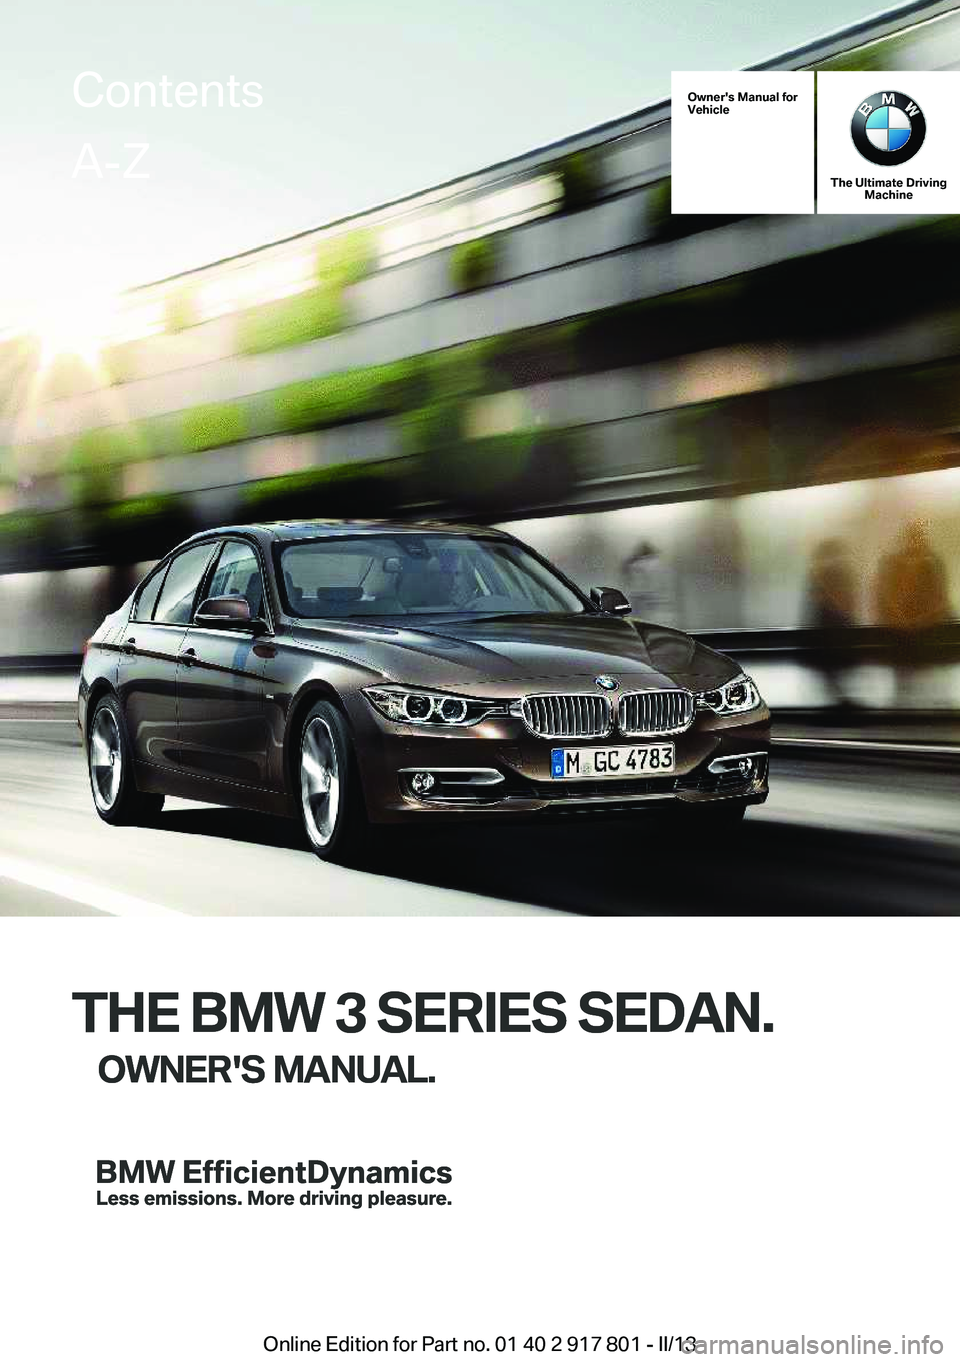 BMW 328I XDRIVE 2013  Owners Manual Owner's Manual for
Vehicle
THE BMW 3 SERIES SEDAN.
OWNER'S MANUAL.
The Ultimate Driving Machine
THE BMW 3 SERIES SEDAN.
OWNER'S MANUAL.
ContentsA-Z
Online Edition for Part no. 01 40 2 917 